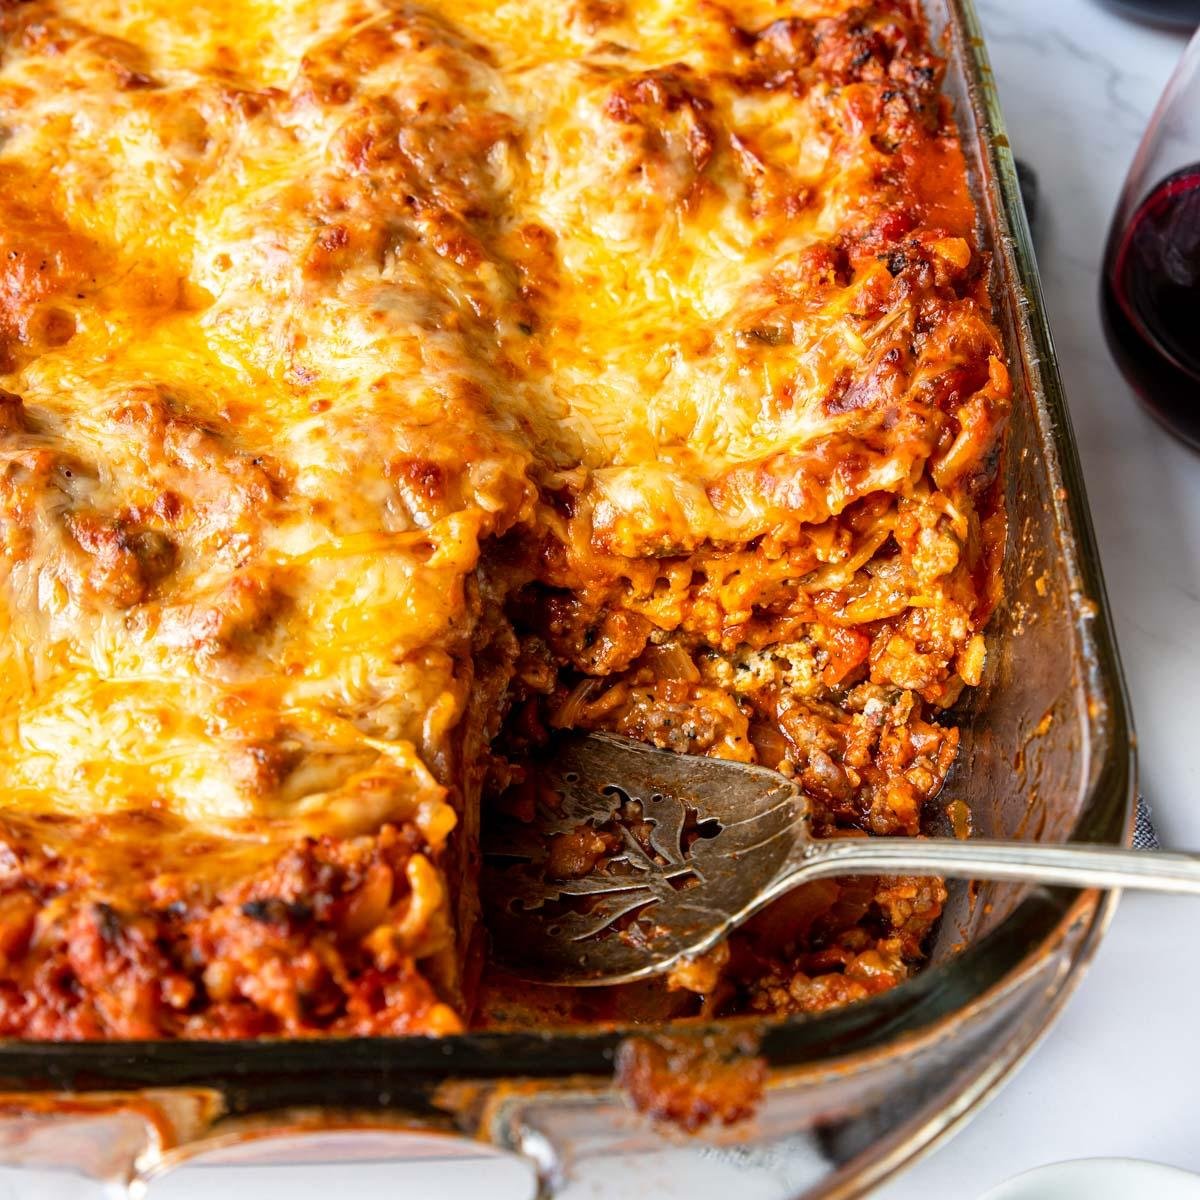 Step-by-Step Guide: How to Make the Ultimate Homemade Lasagna